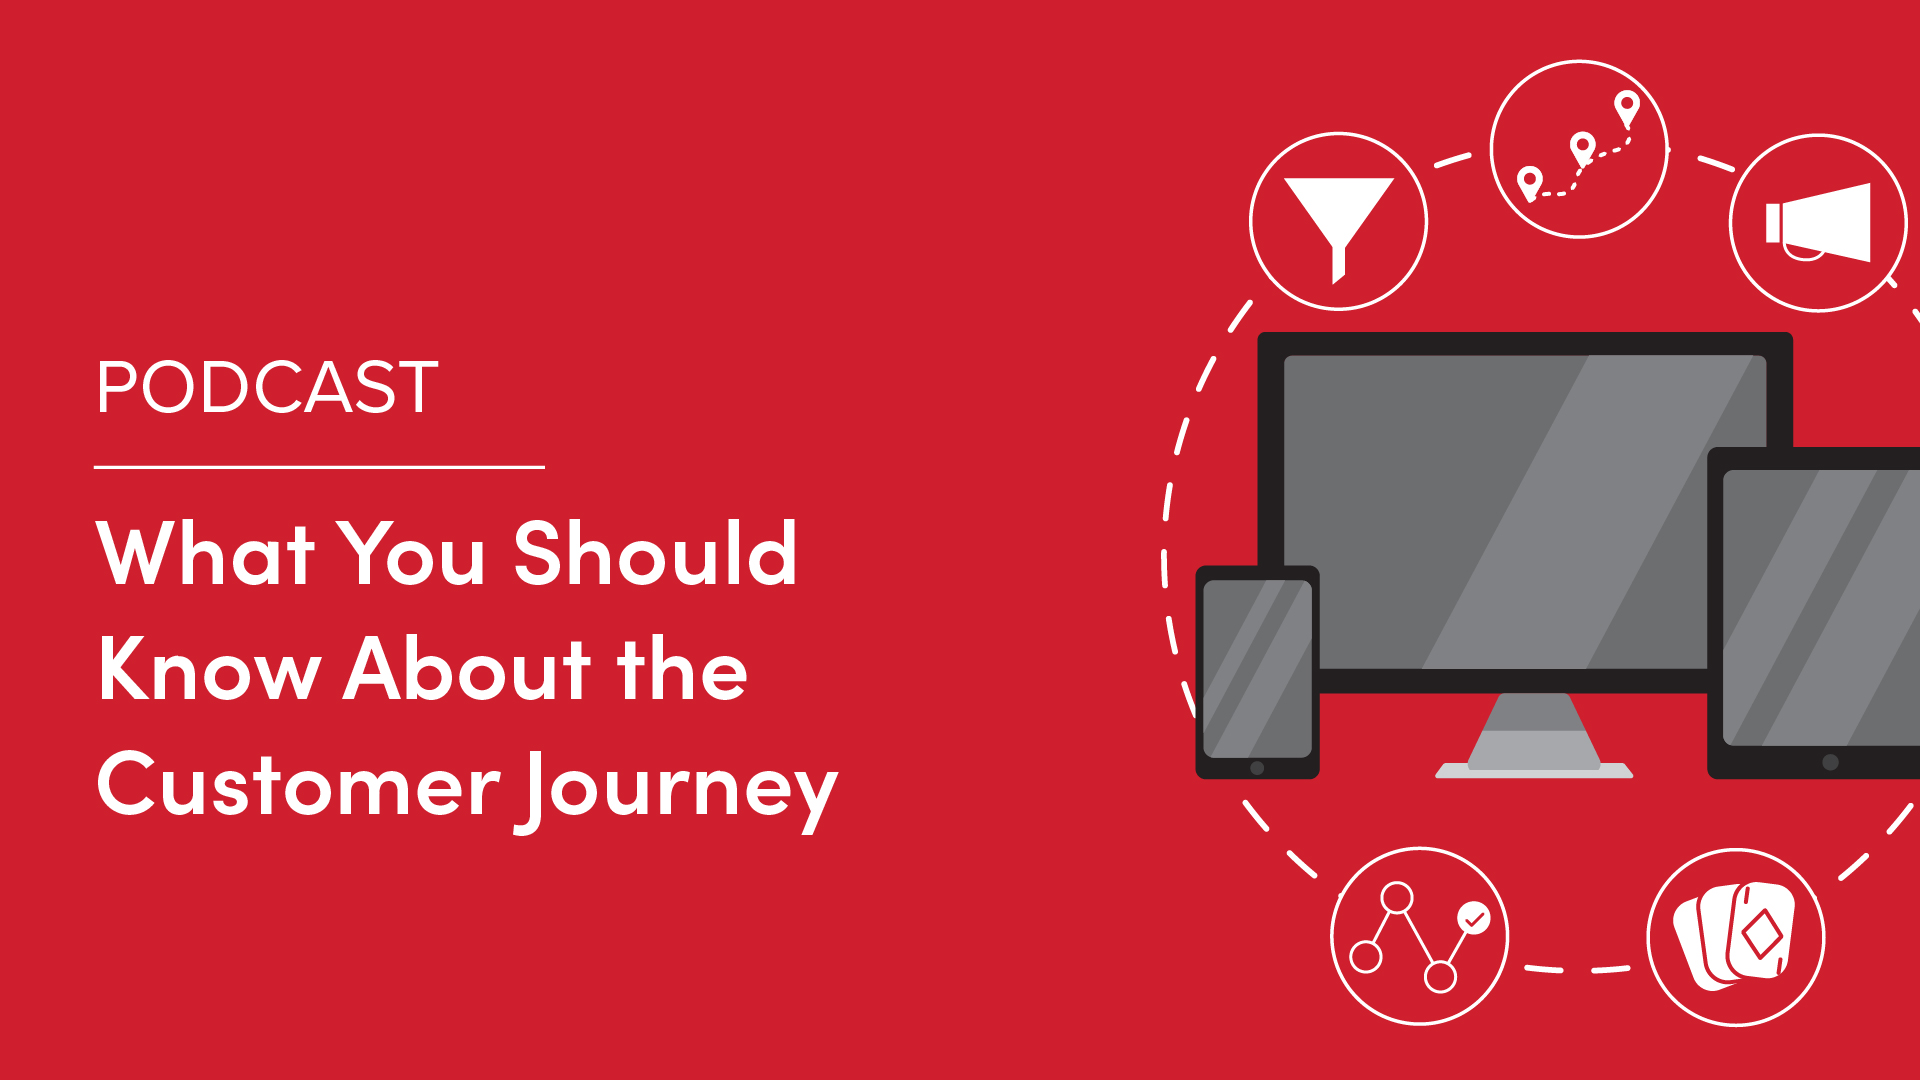 Podcast: What You Should Know About the Customer Journey